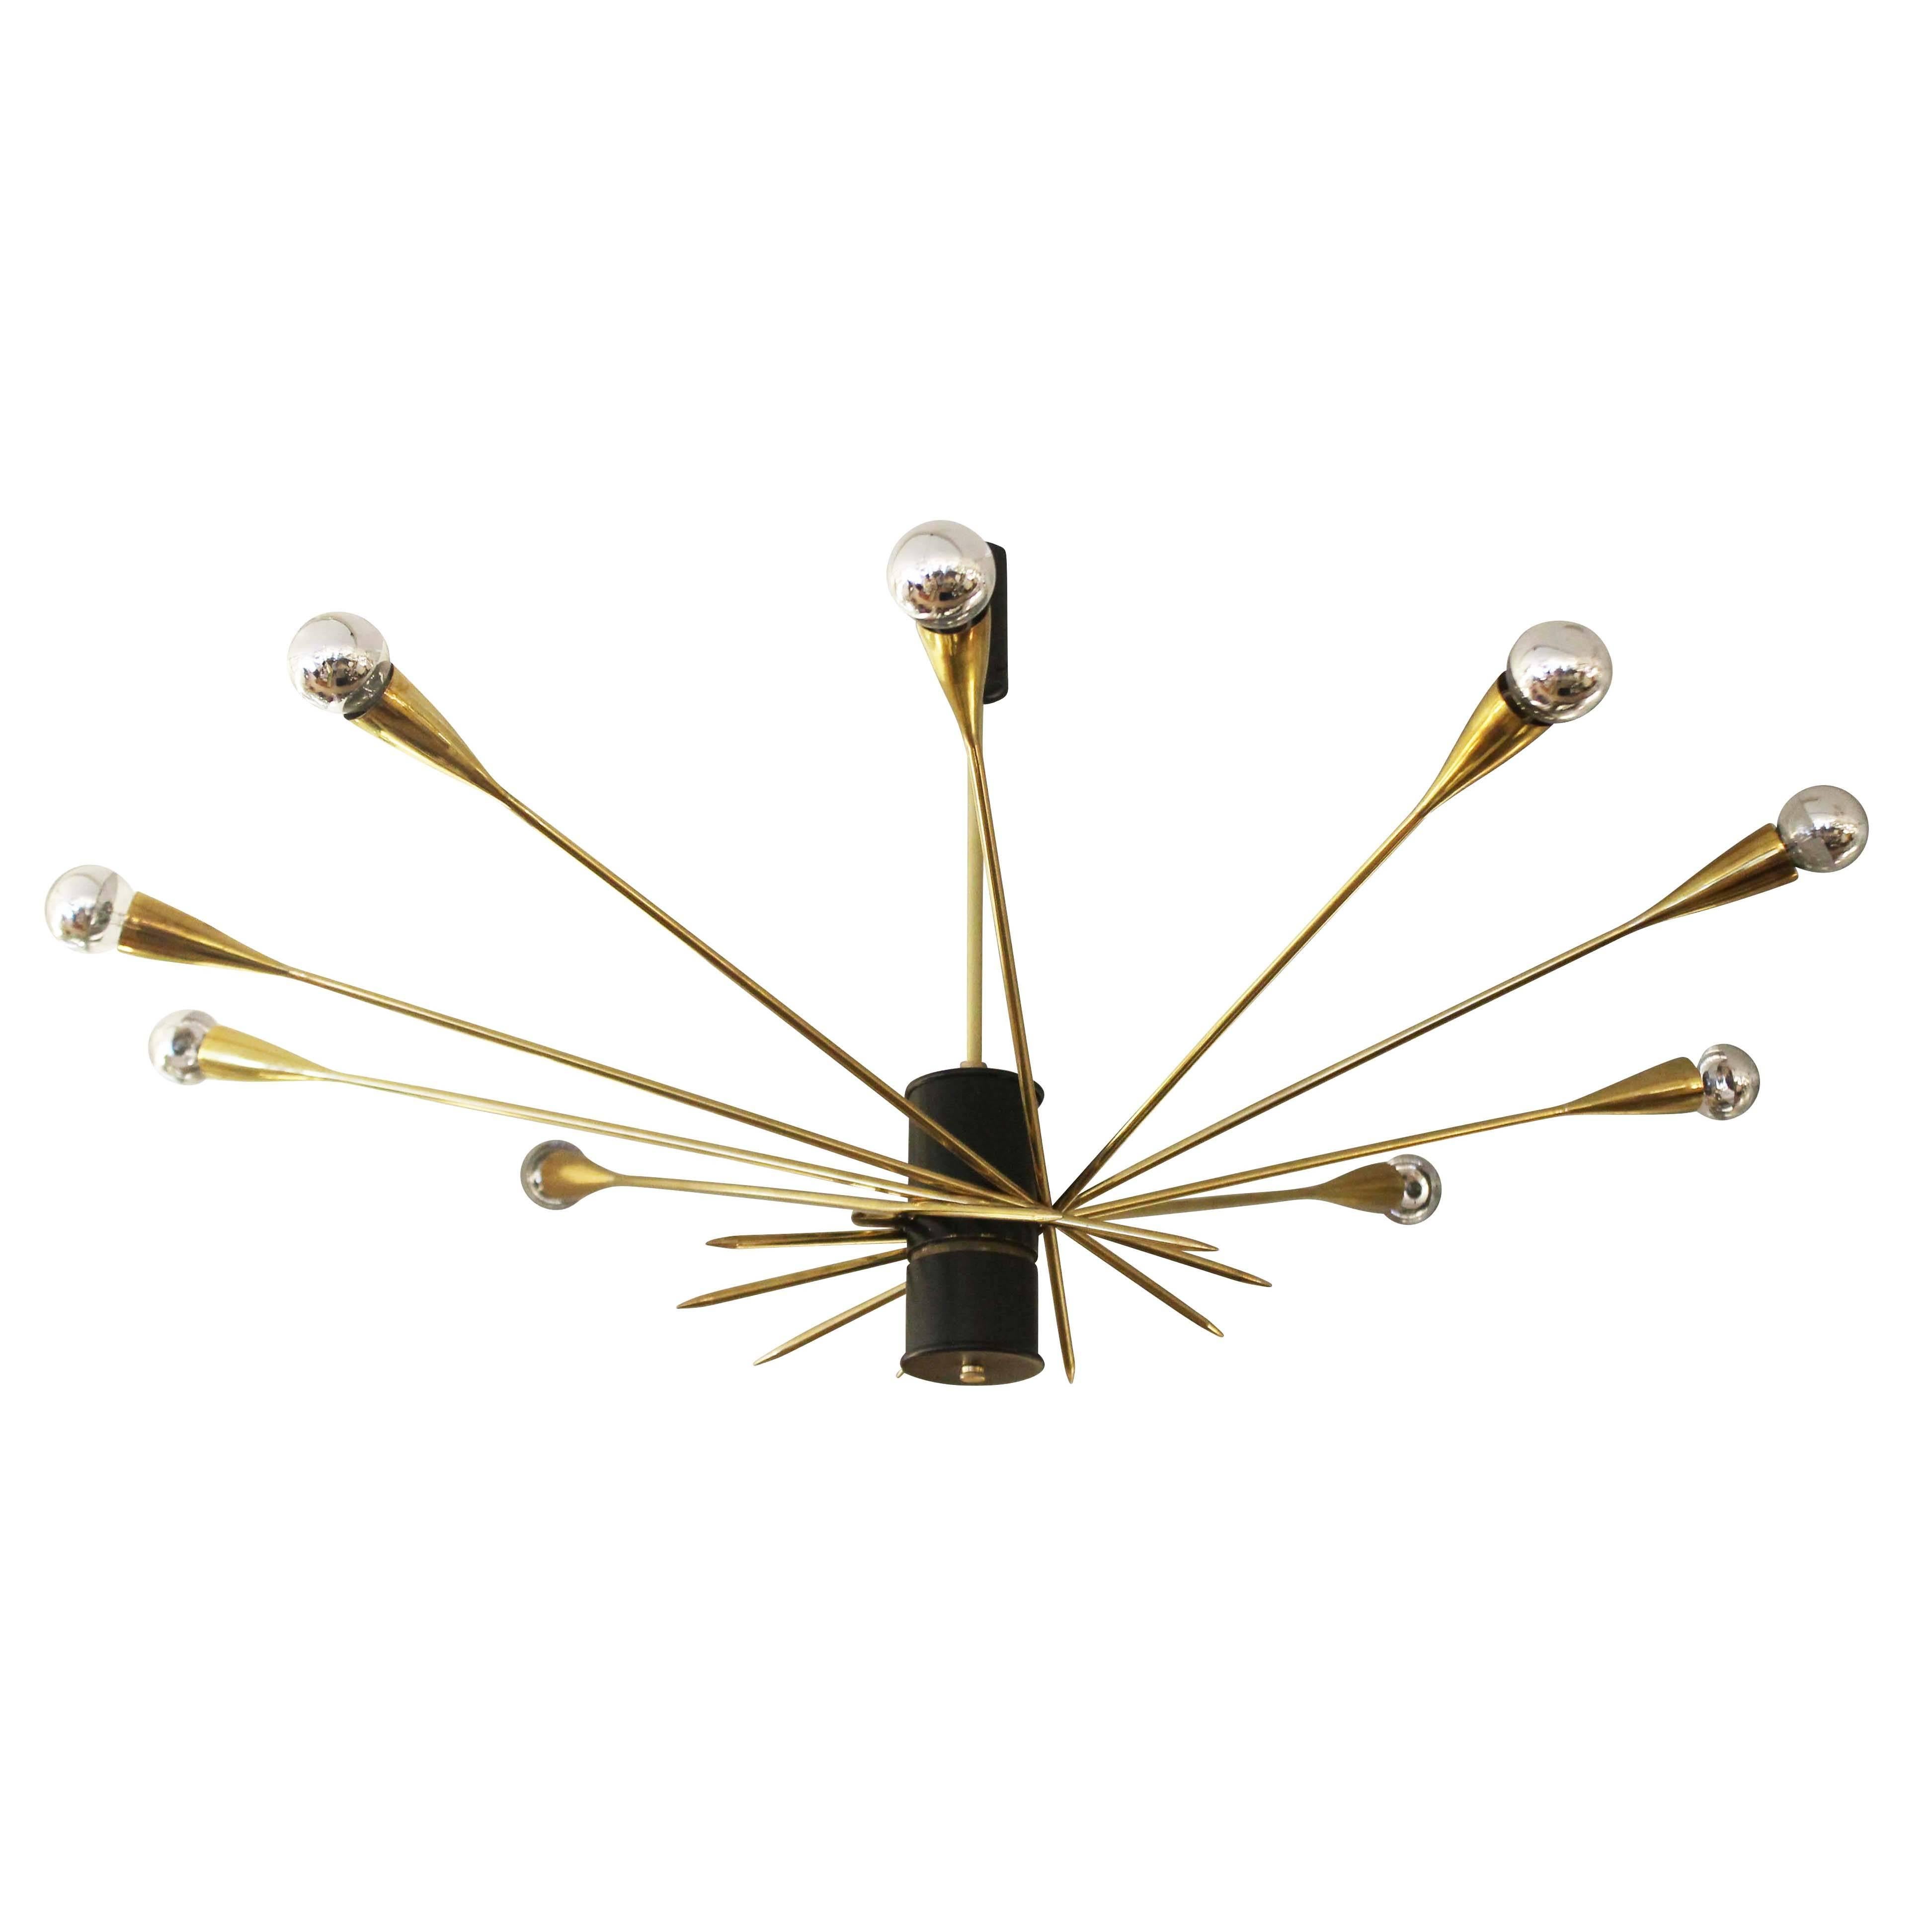 Elegant chandelier with ten spiked arms ending in a light bulb. The chandelier is entirely made in brass with the main cylinder painted black. The high quality of craftsmanship and some of the hardware details strongly point to Stilnovo being the